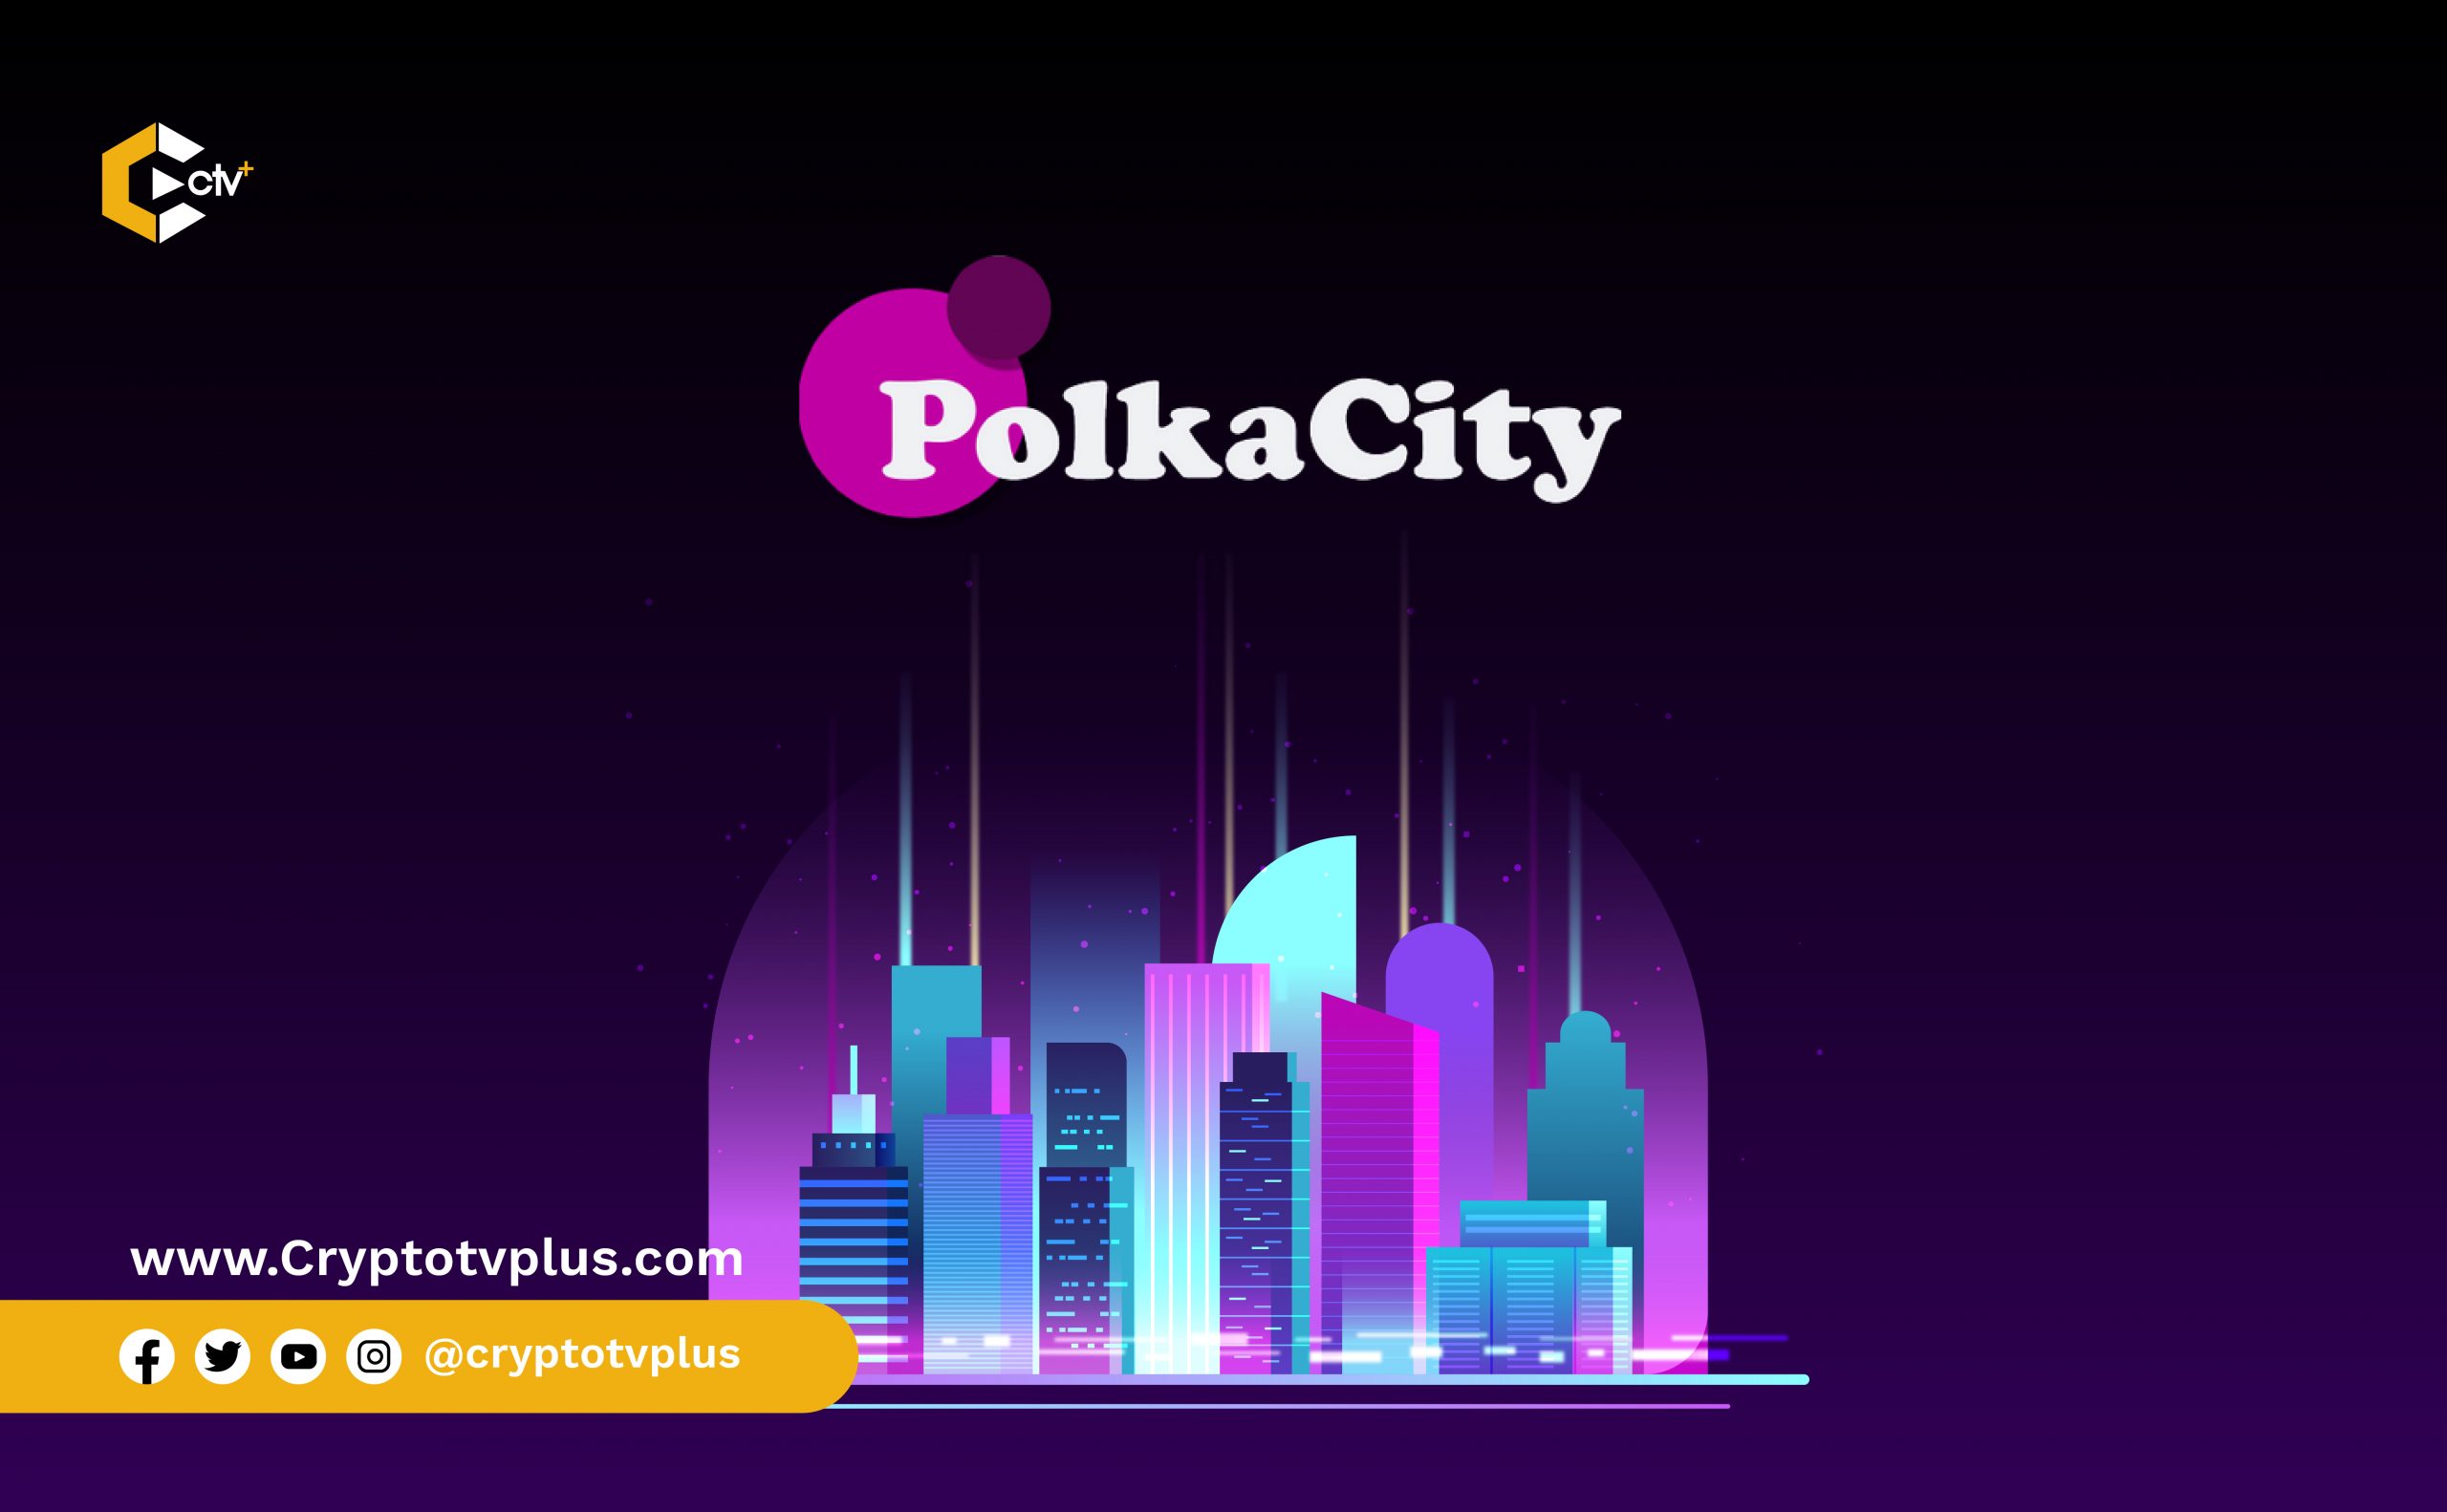 PolkaCity Metaverse: Earn Profits ‍by Owning Virtual Taxis, Gas Stations & Services

